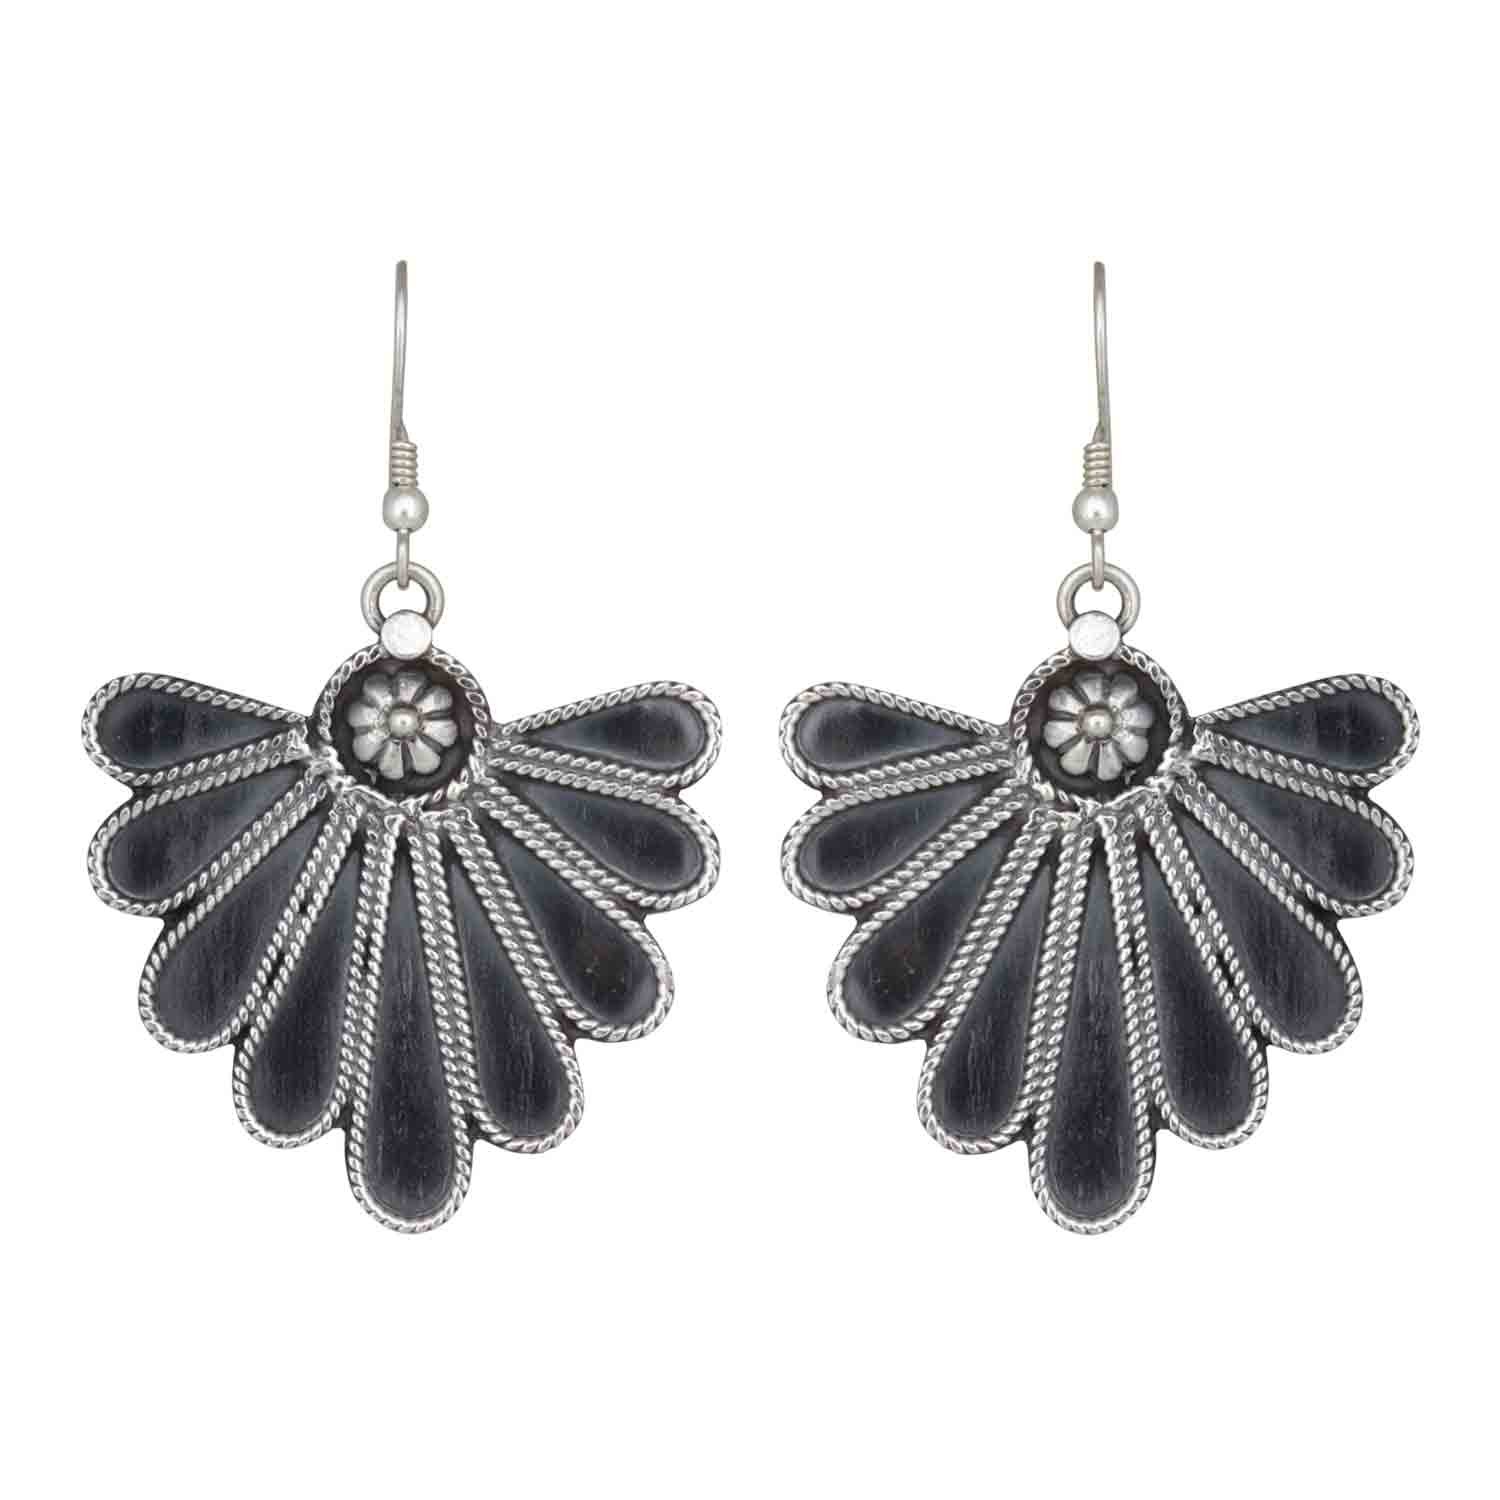 Floral Oxidized Dangle Drop Earrings for Women and Girls